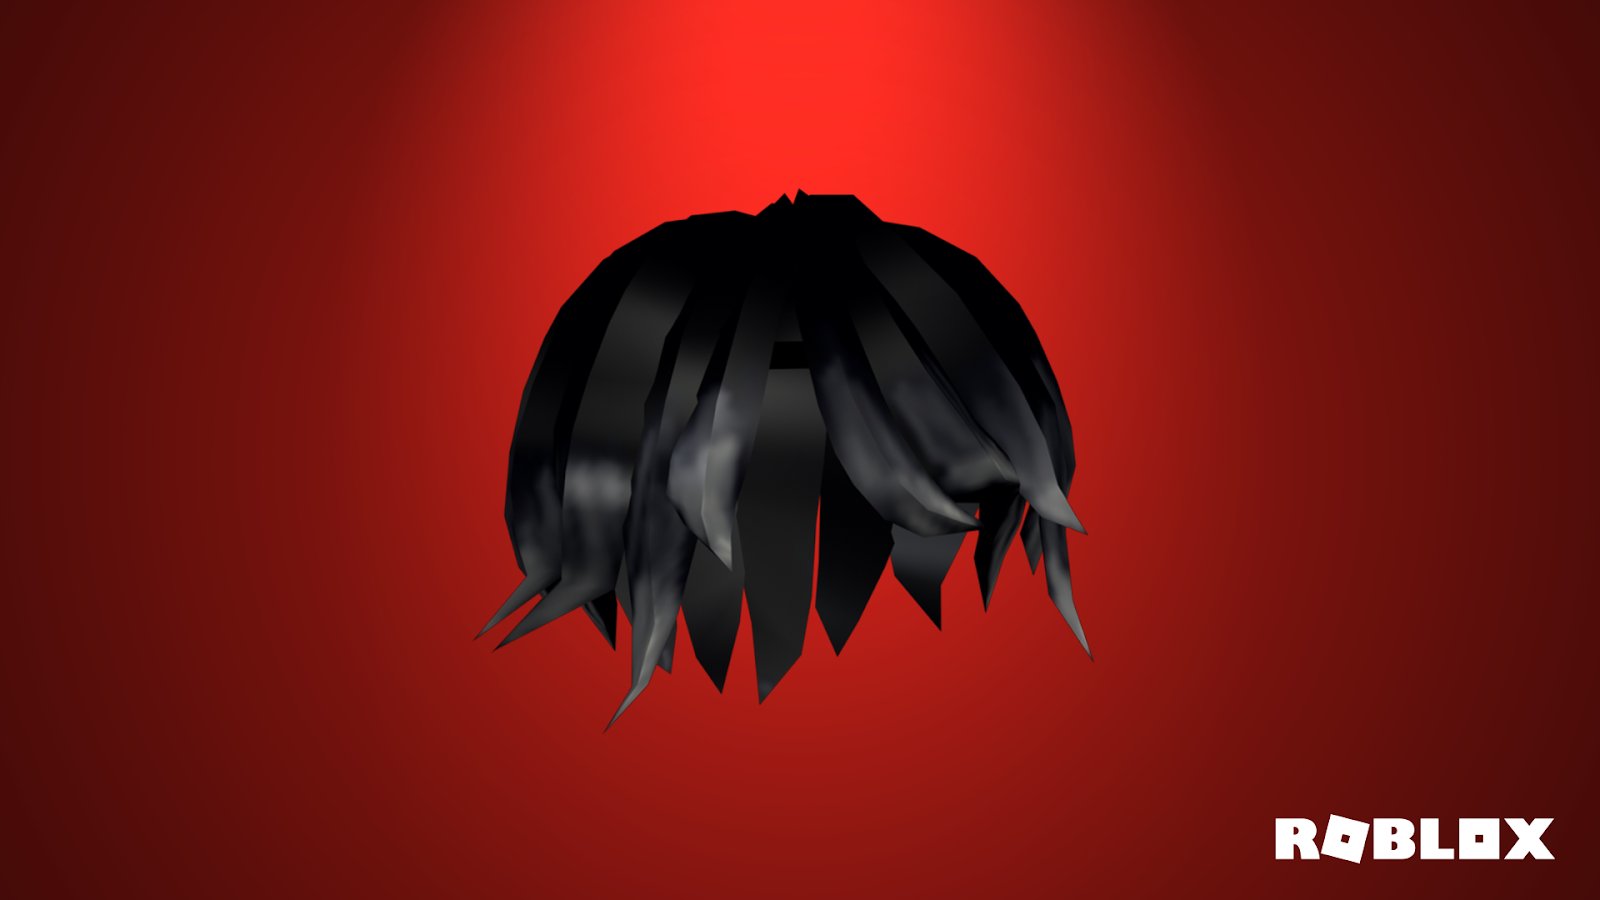 Roblox On Twitter There S A Fine Line Between Background Character And Chosen One And It Starts And Ends With The Hairstyle Young Yoshimi Hair Https T Co Fym3wogmxx Memorialdayweekend Roblox Https T Co Fjsxefszwe - young yoshimi hair roblox